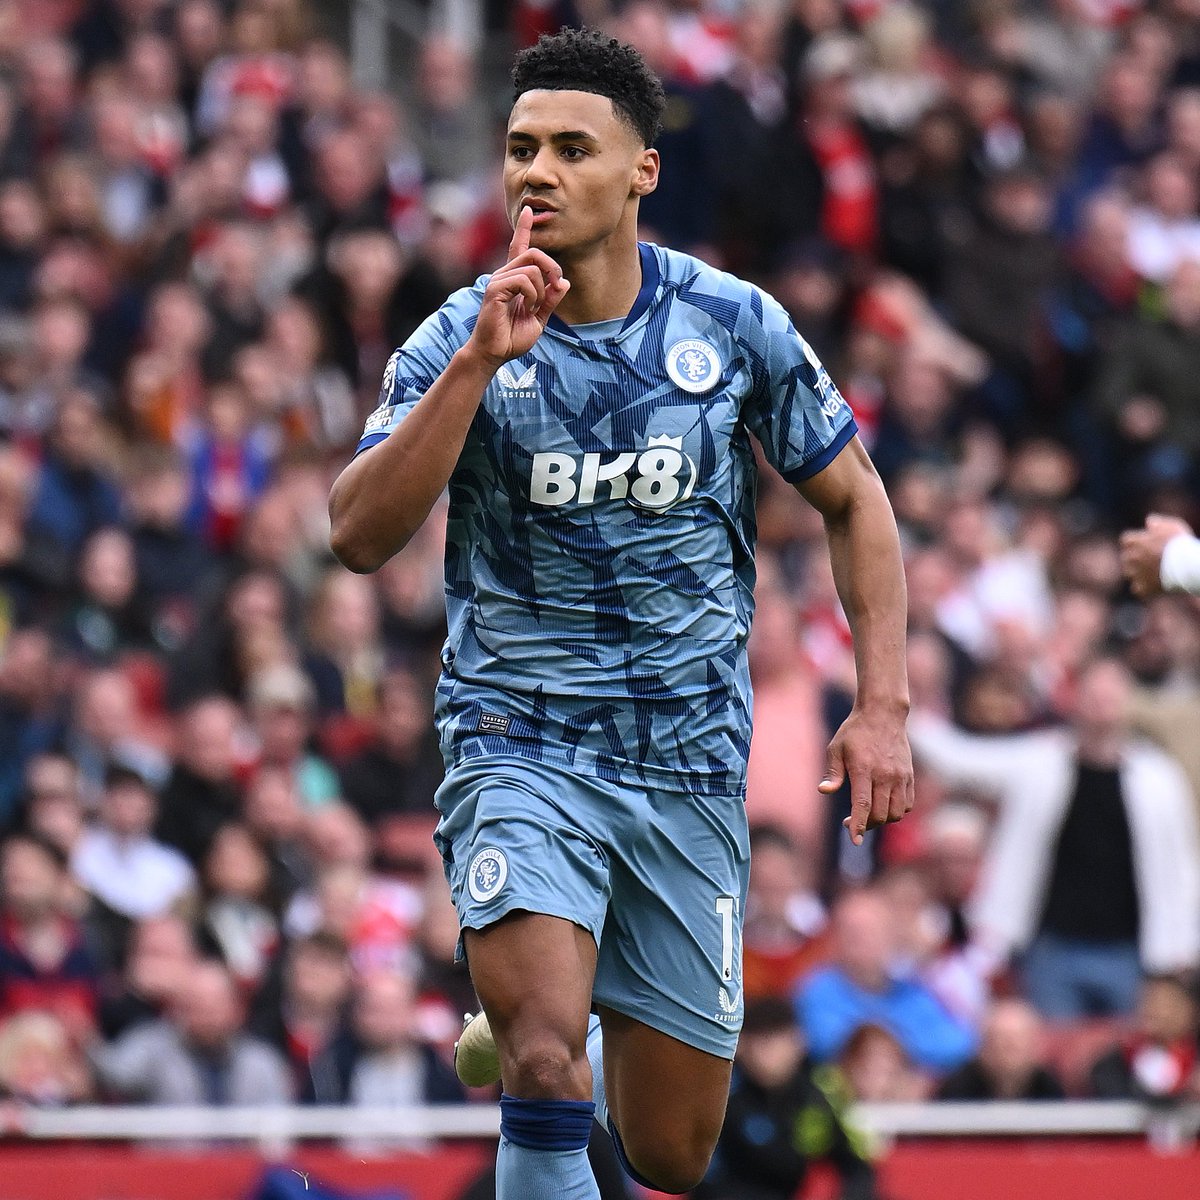 Most non-penalty goals in the Premier League this season:

◎ 19 - Ollie Watkins
◎ 16 - Dominic Solanke
◎ 16 - Erling Haaland
◎ 15 - Jarrod Bowen
◎ 14 - Son Heung-min
◎ 14 - Phil Foden

#AVFC's hitman goes three clear at the top. ⚽️